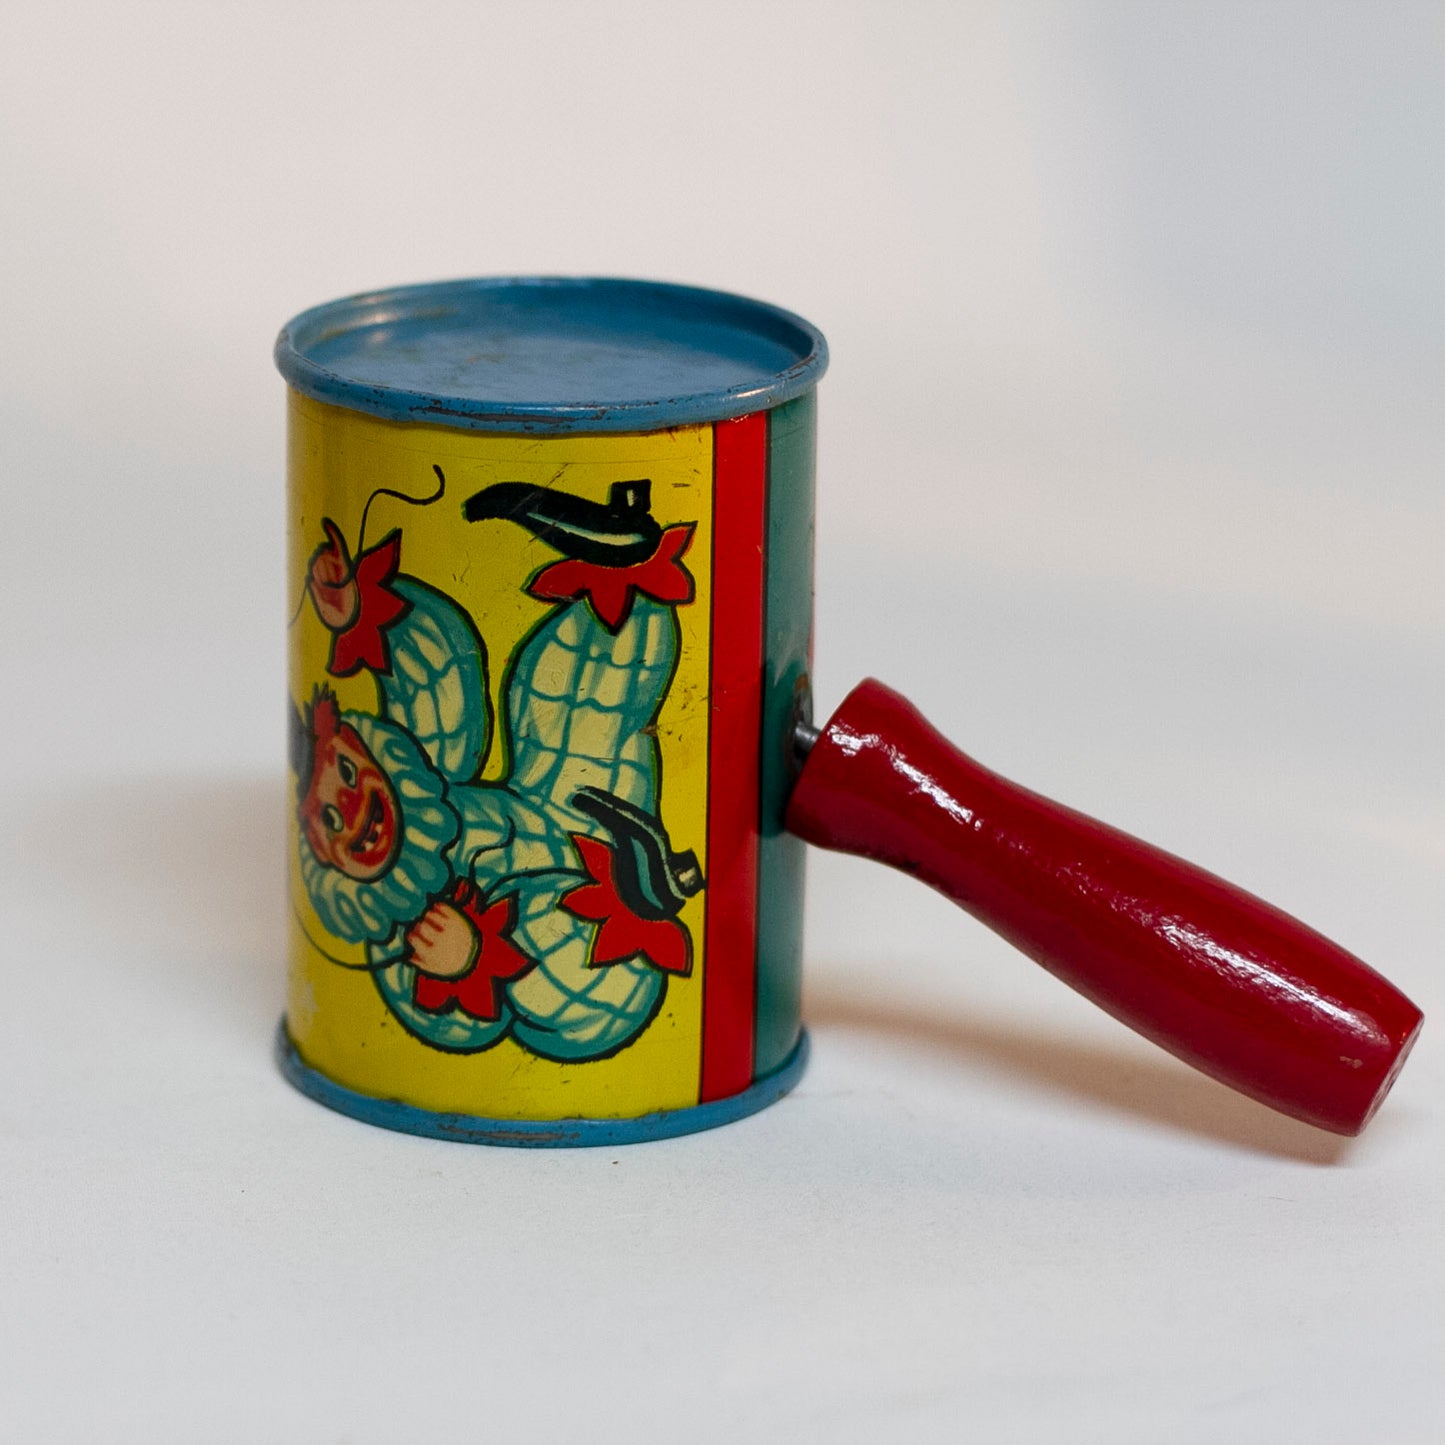 This is an older style tin LITHOGRAPH CLOWN NOISEMAKER that likely dates to the 1930s or 1940s is in the shape of a small can. The lithograph depicts two clowns, one dressed in a white and red polka-dot clown suit and the other is "toothless" and dressed in blue plaid. Scene background in yellow. A red wooden handle is